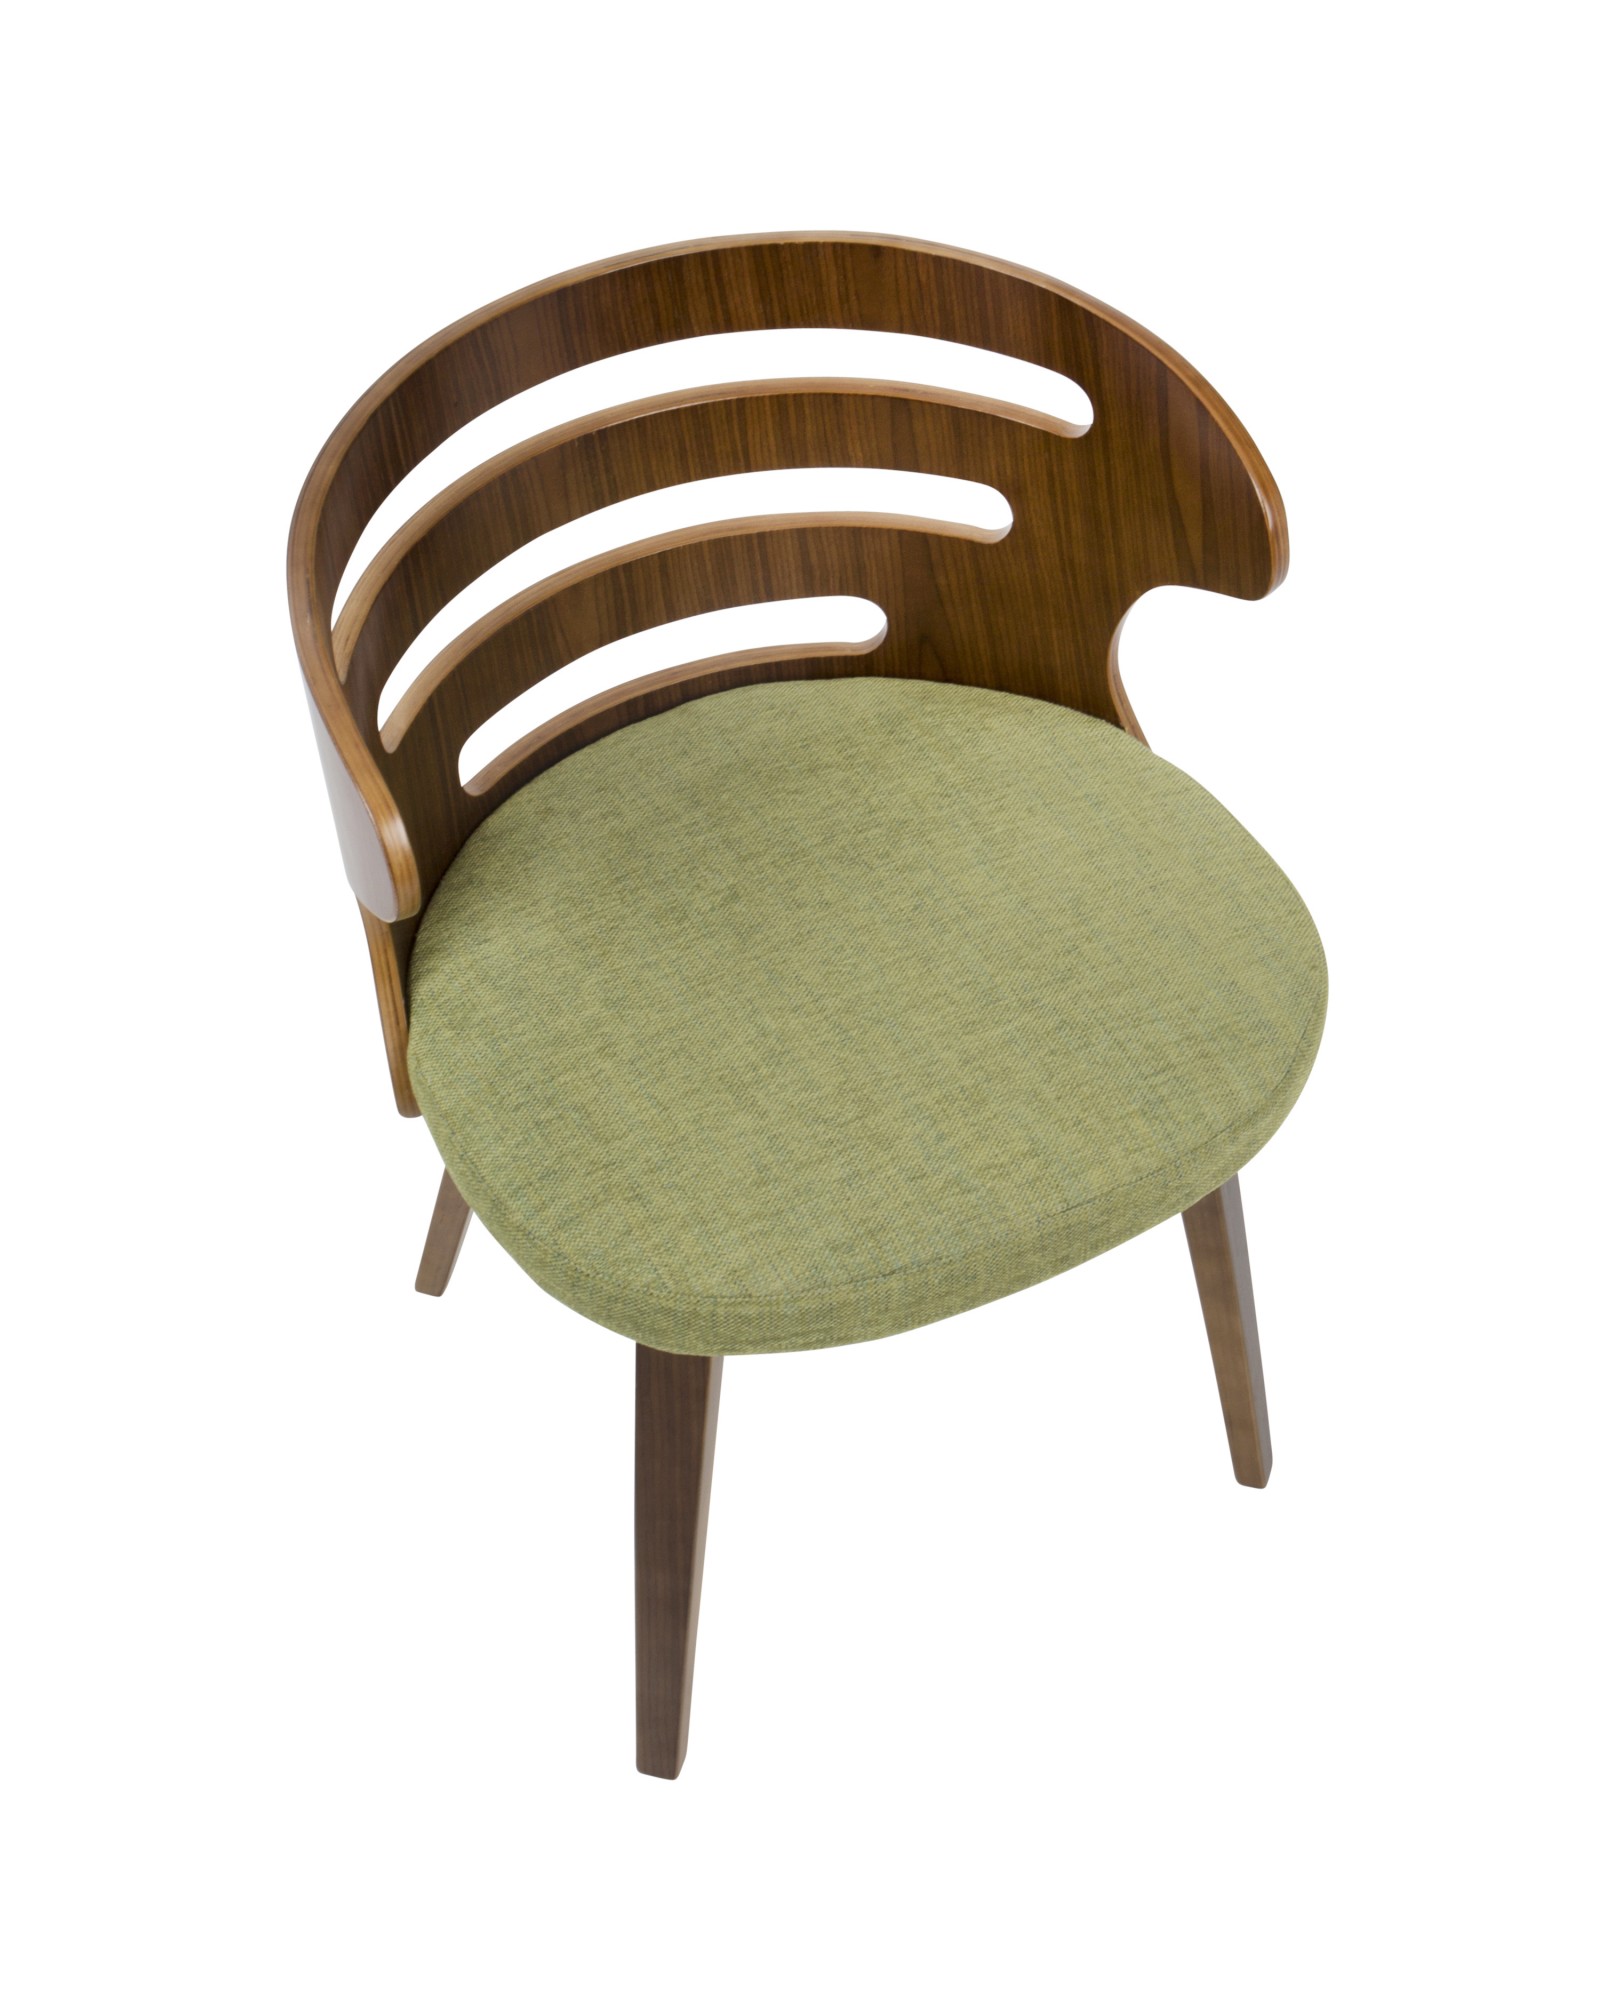 Cosi Mid-Century Modern Dining/Accent Chair in Walnut and Green Fabric